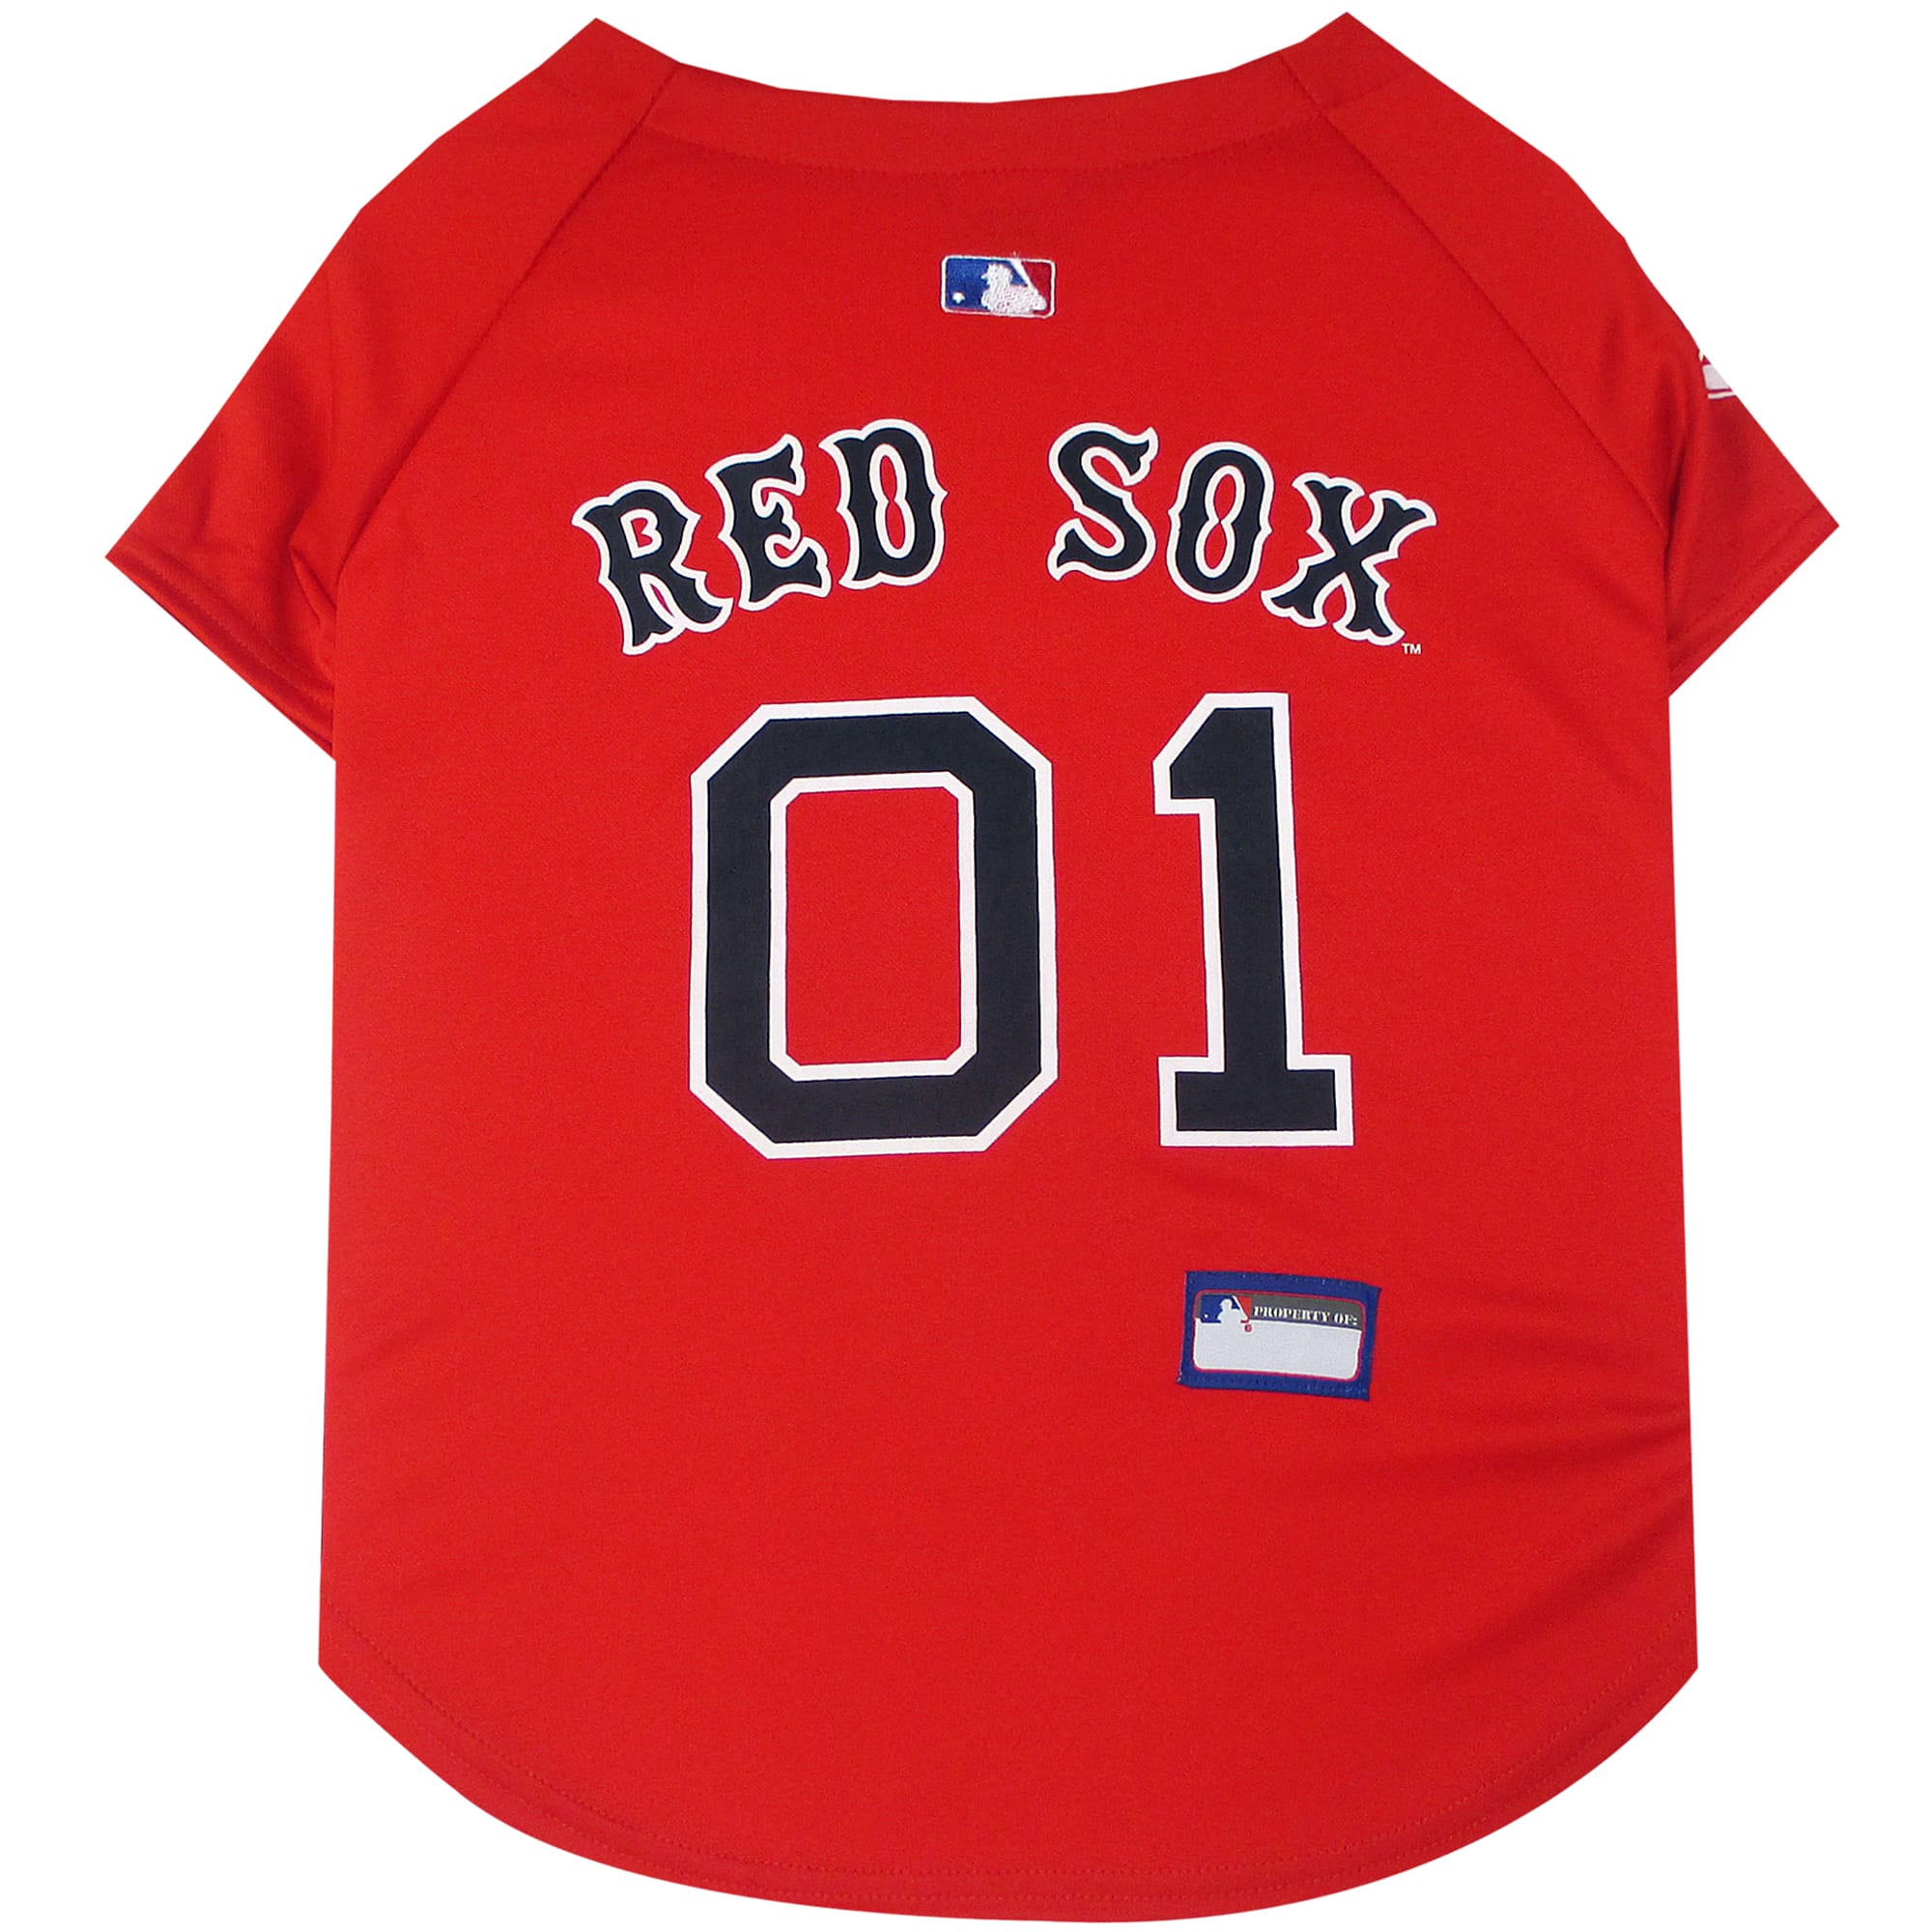 Boston red sox official site